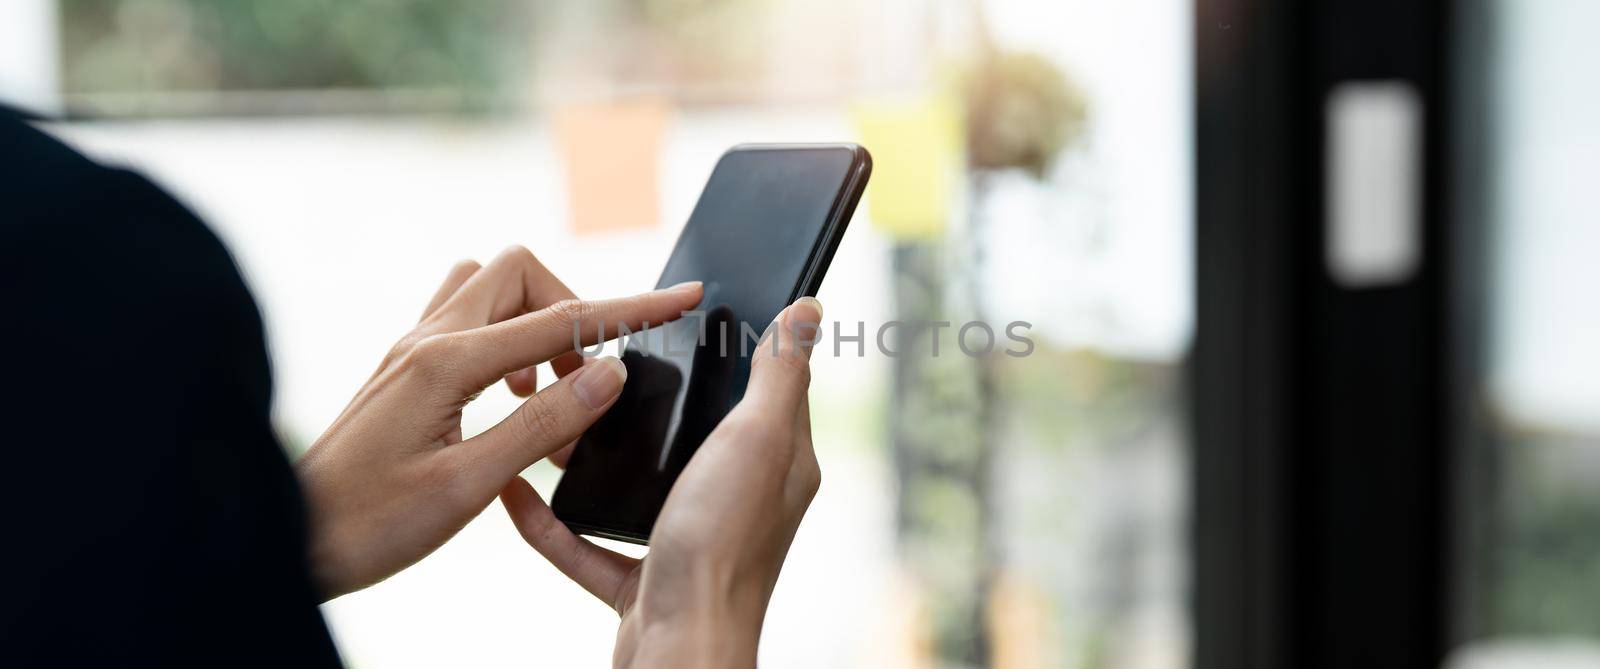 point finger on screen phone closeup, person texting text message, hipster touch on screen on smartphone, girls using in hands mobile phone close up, online wi-fi